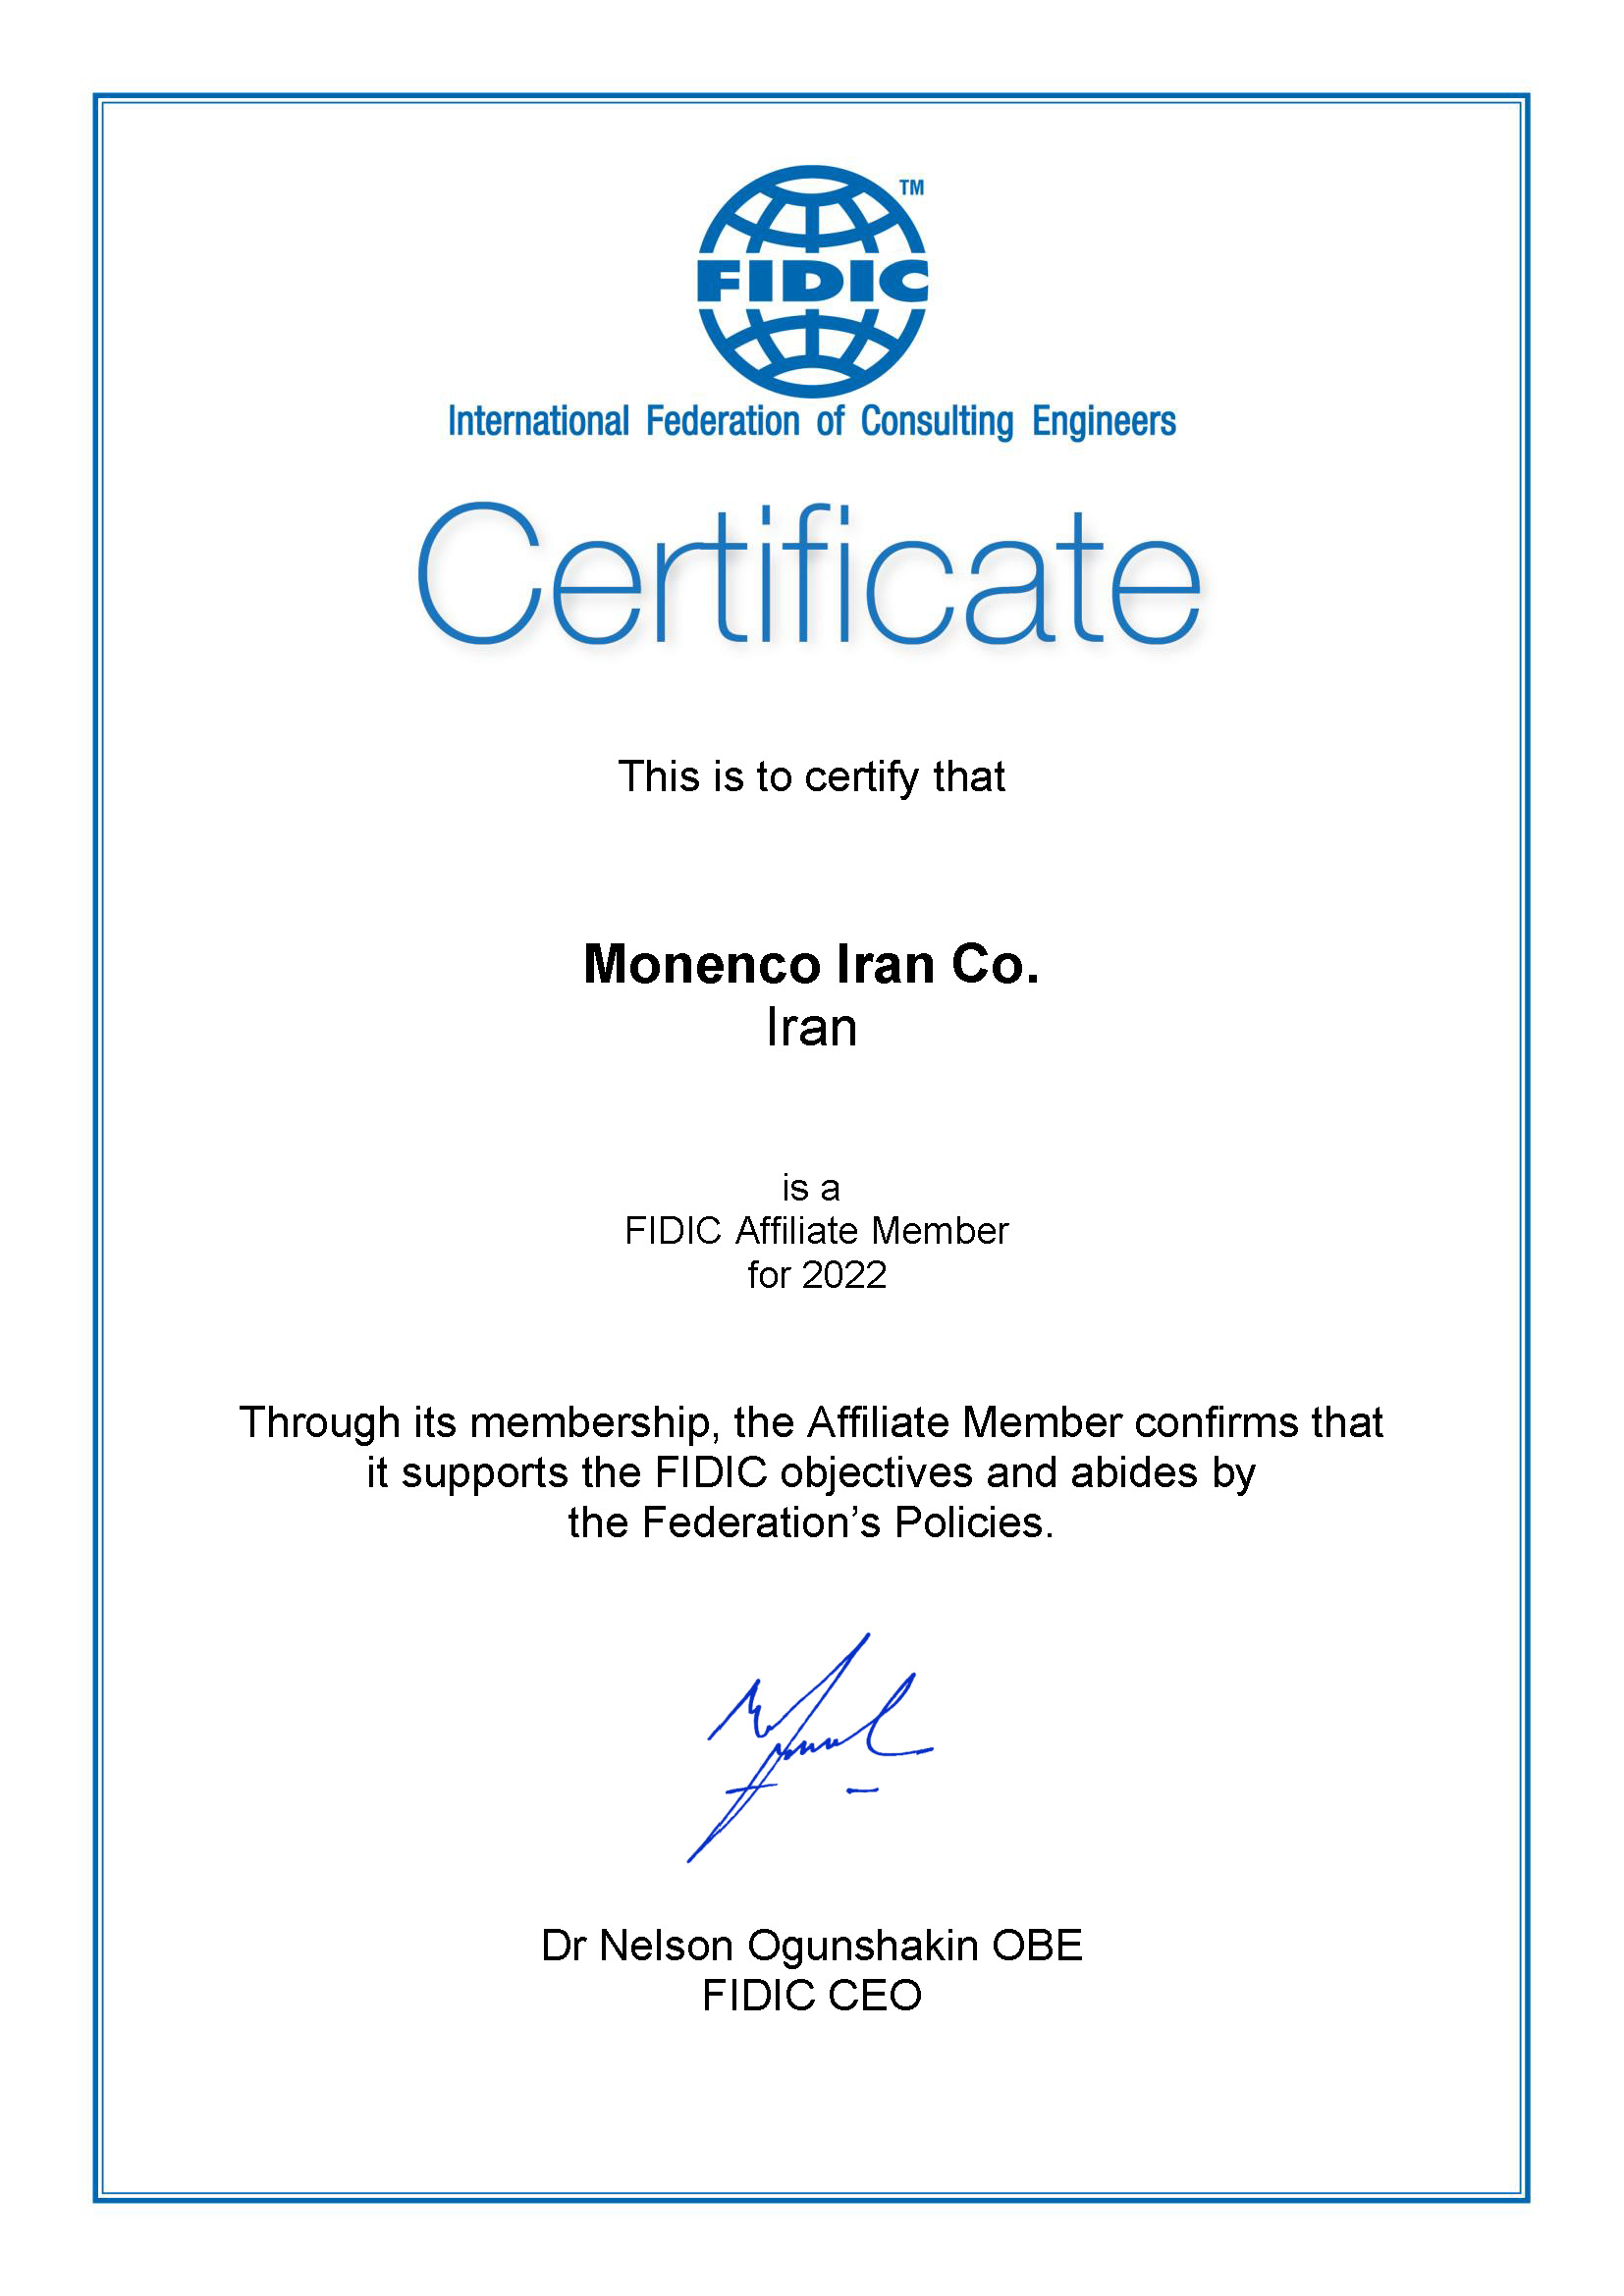 Renewal of Affiliate Membership of Monenco Iran in International Federation of Consulting Engineers (FIDIC)